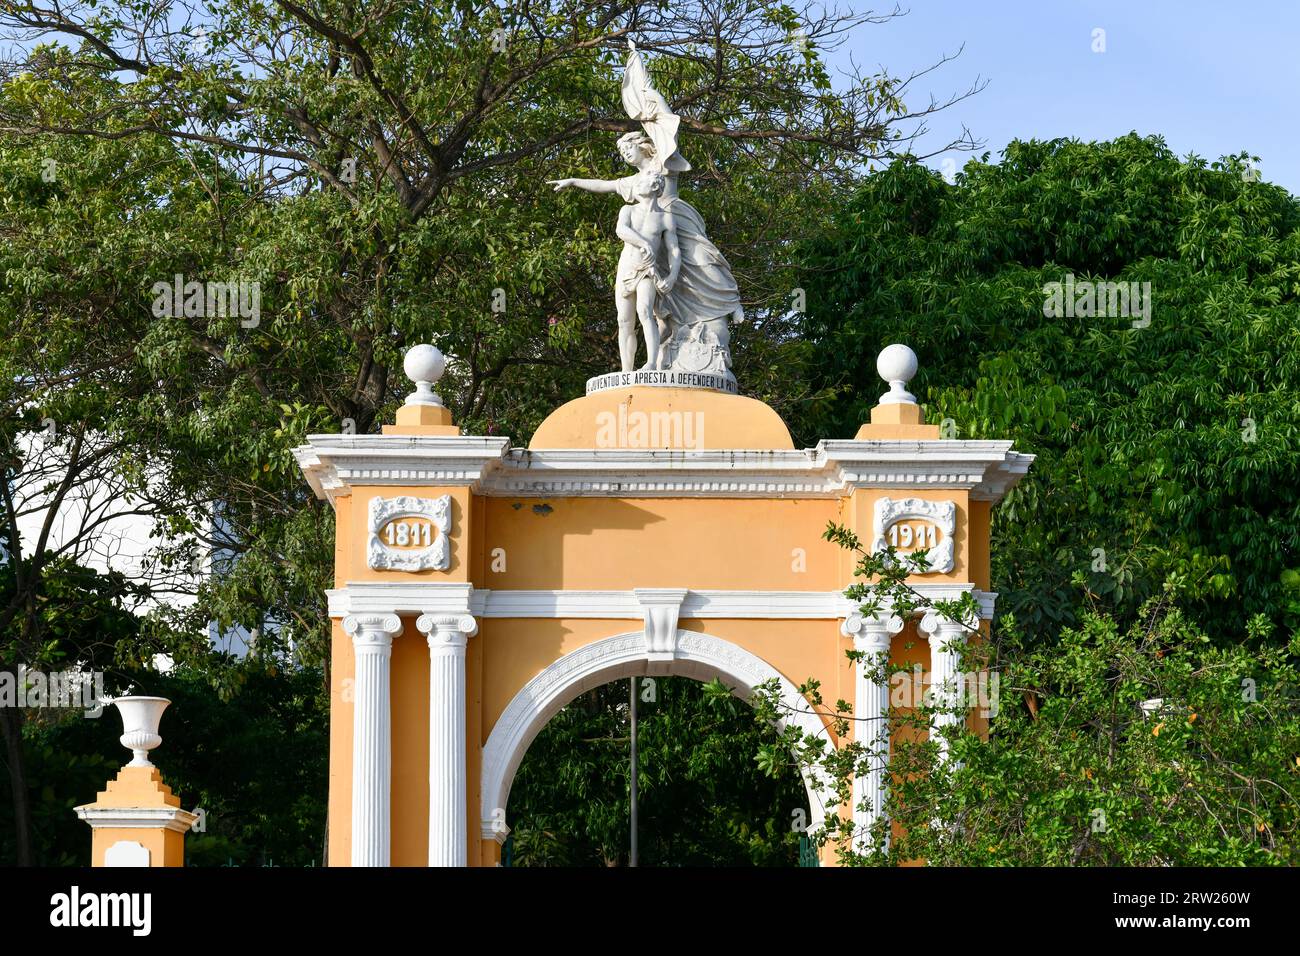 Centennial Park in Cartagena, Colombia. The park commemorates the 100th anniversary of the proclamation of Cartagena’s independence in 1811. Stock Photo